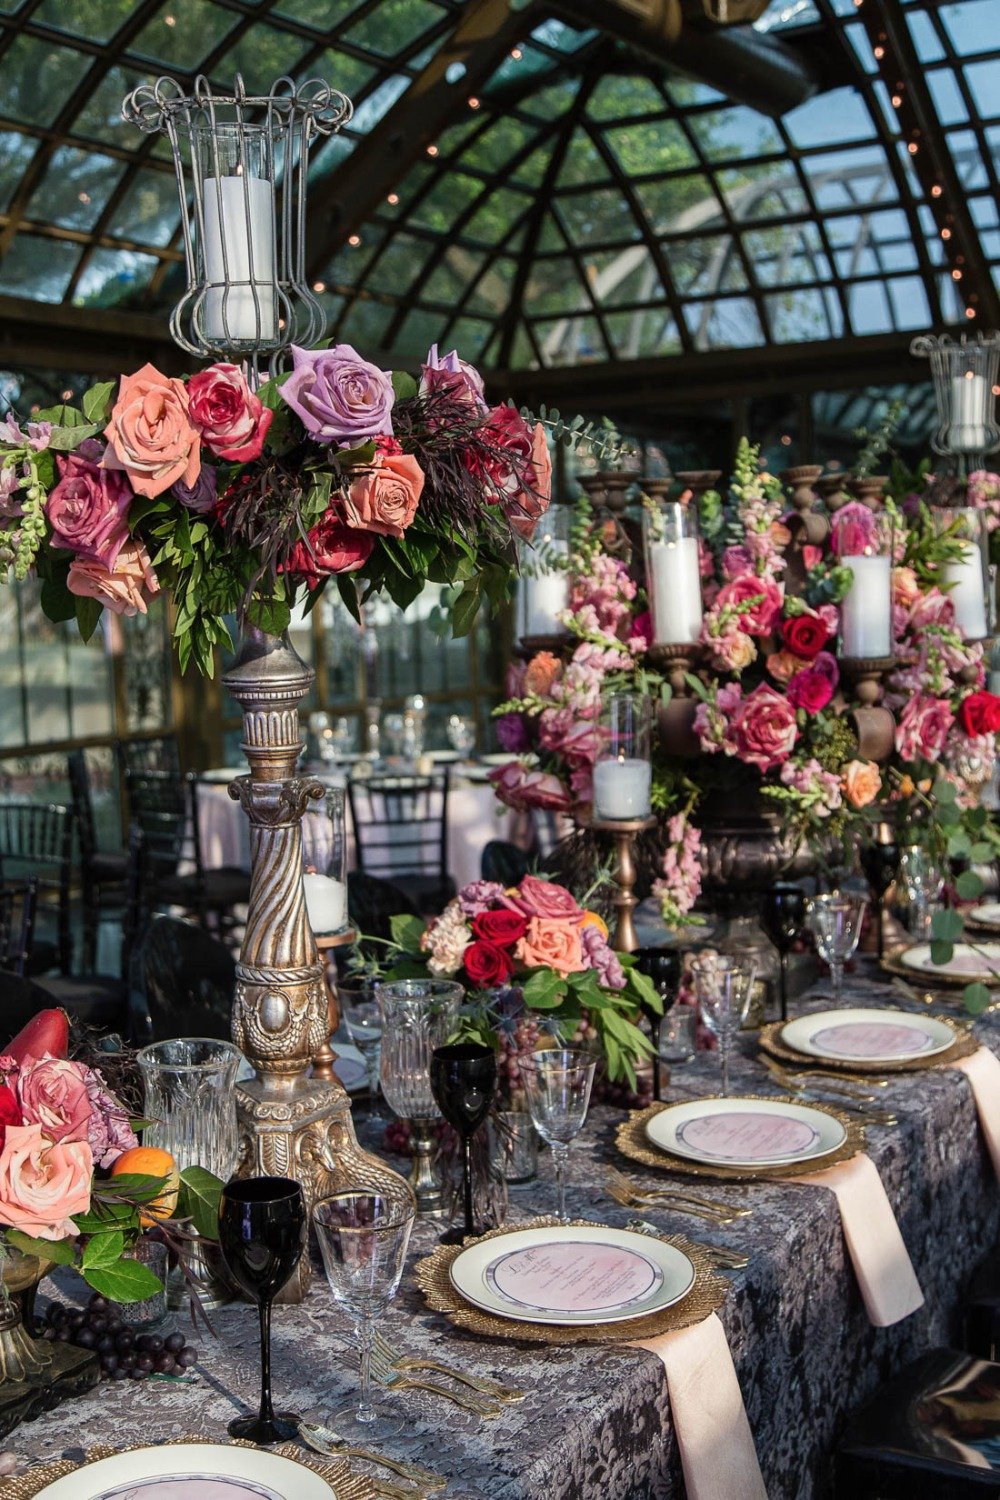 Tall and elegant centerpieces